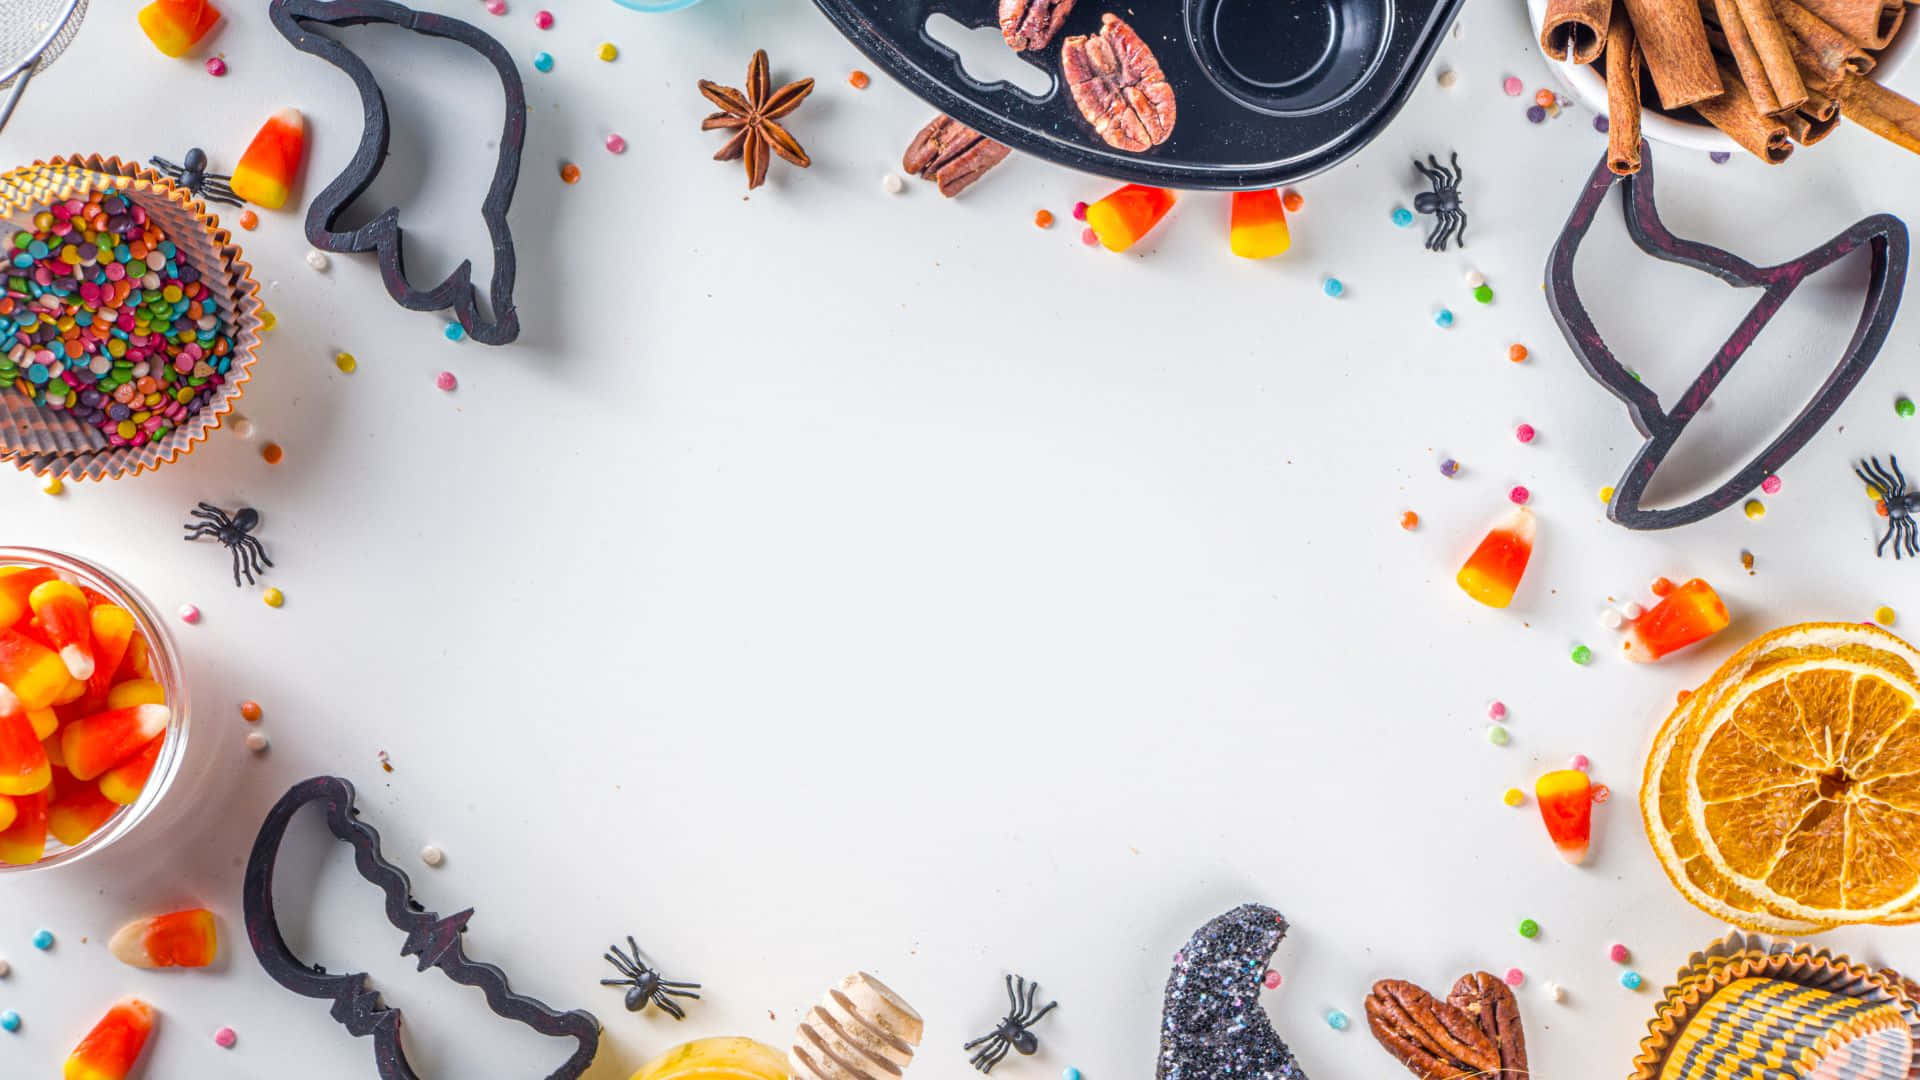 Make Your Next Halloween Party Unique with Spooky Cookie Cutters! Wallpaper